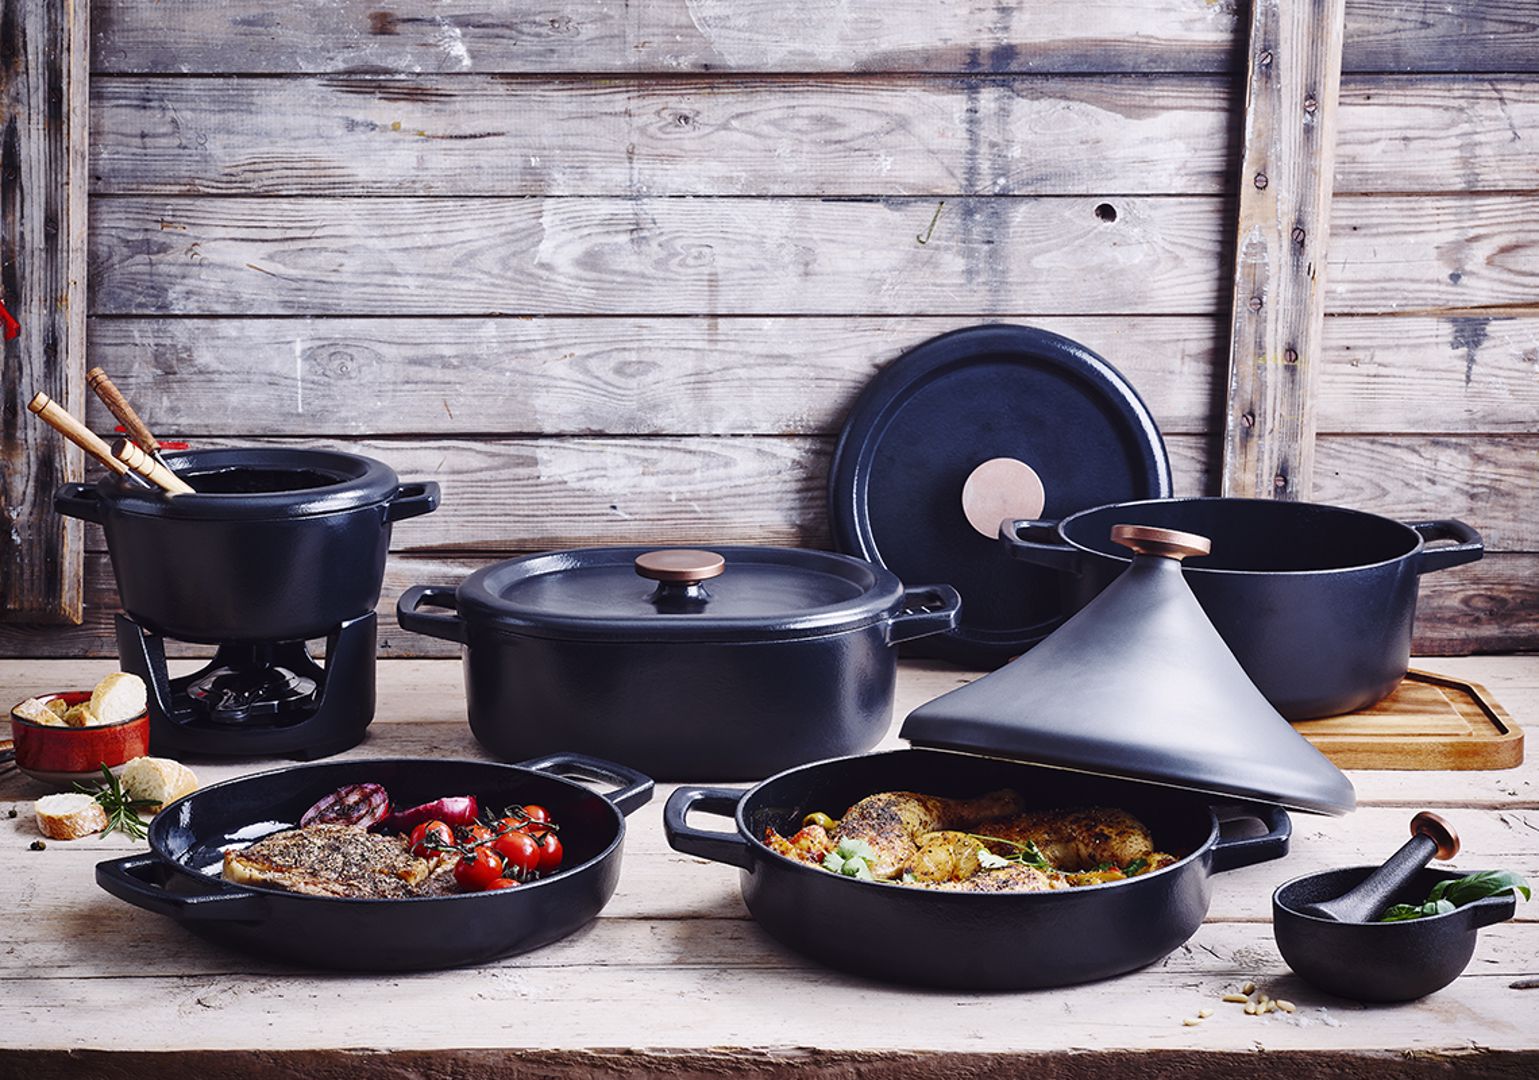 Discover Nori: our cast iron collection from generation to generation